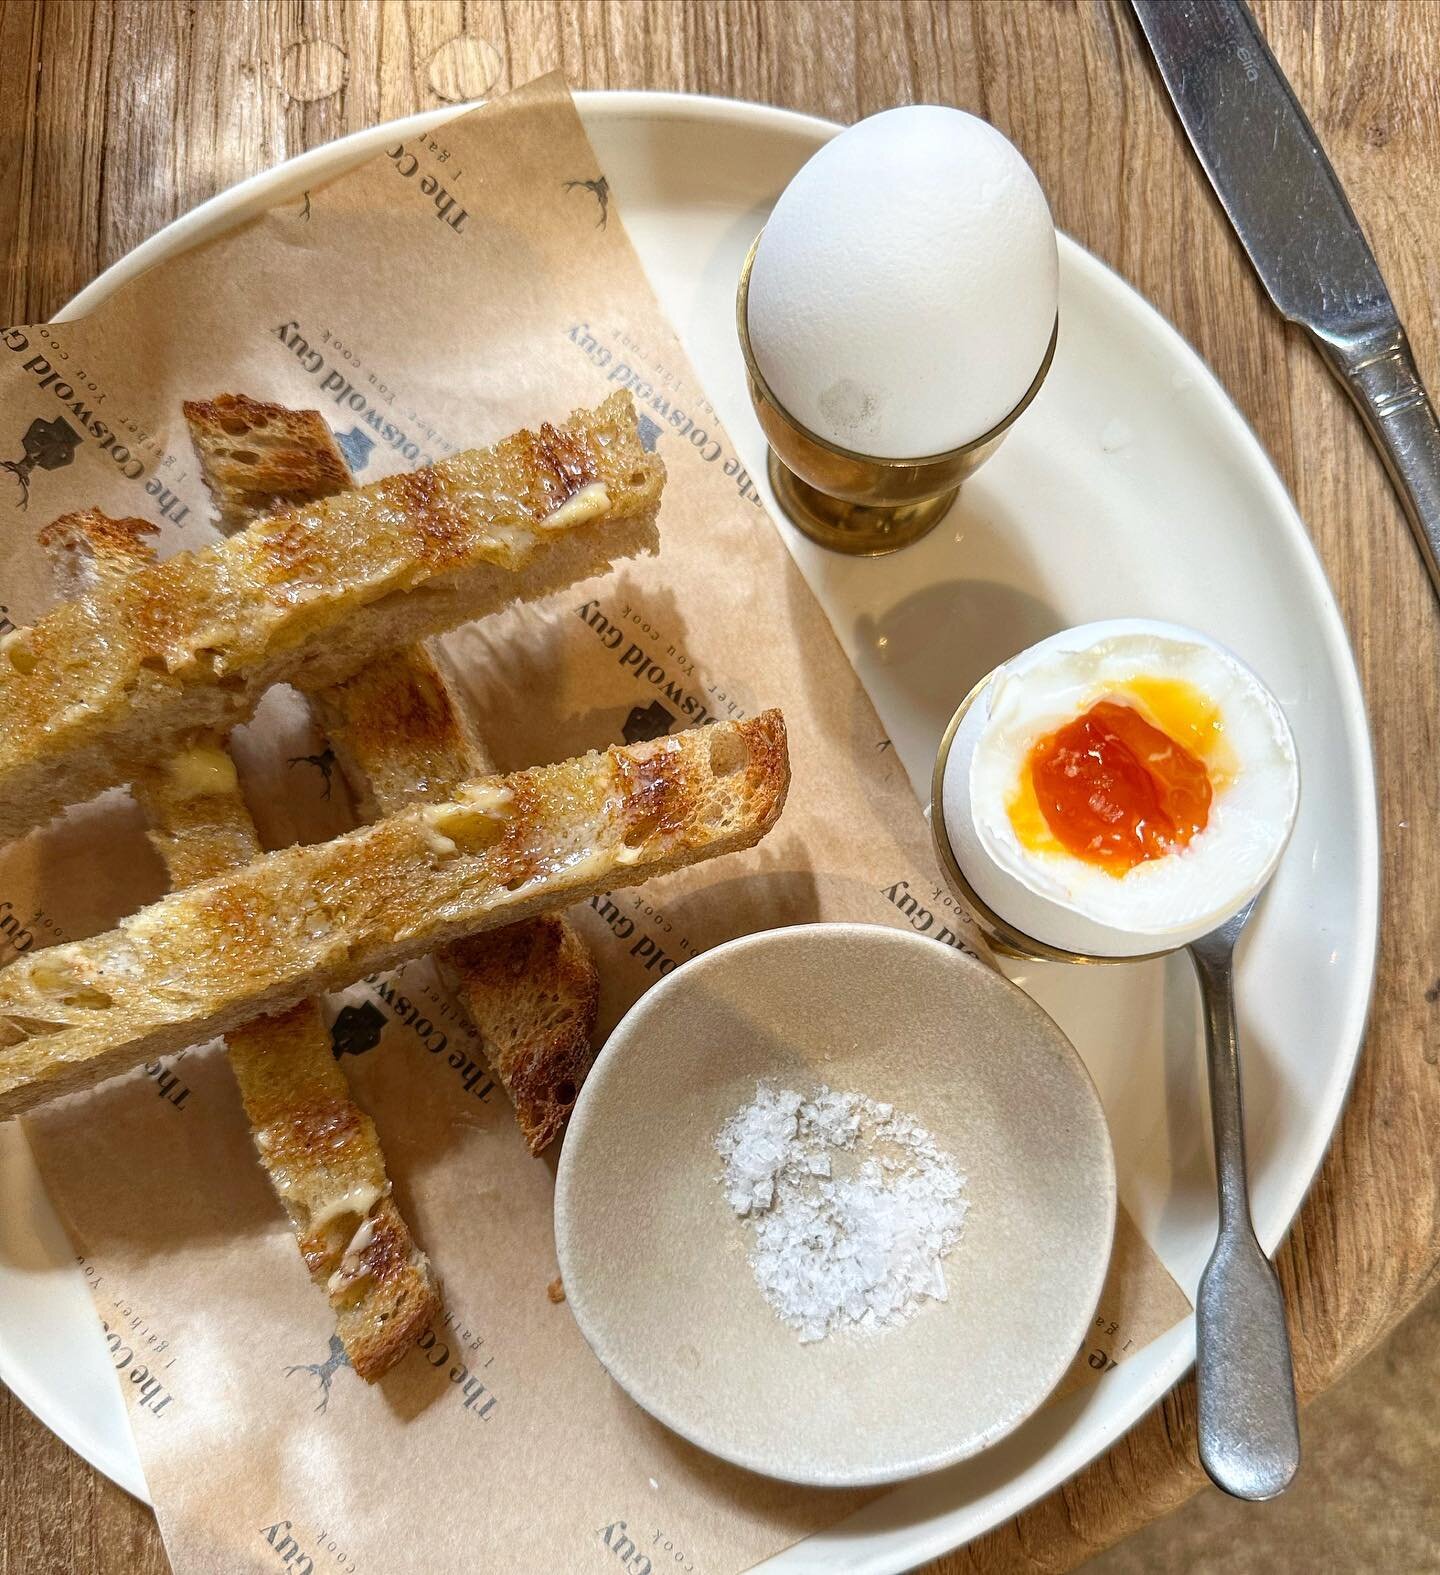 #eggsyourway @thecotswoldguy Breakfast served daily until 12noon, 7 days per week at the Gagingwell location&hellip; 🥚🍳 #runnyyolk #eggandsoldiers #breakfast #brunch #thecotswoldguy